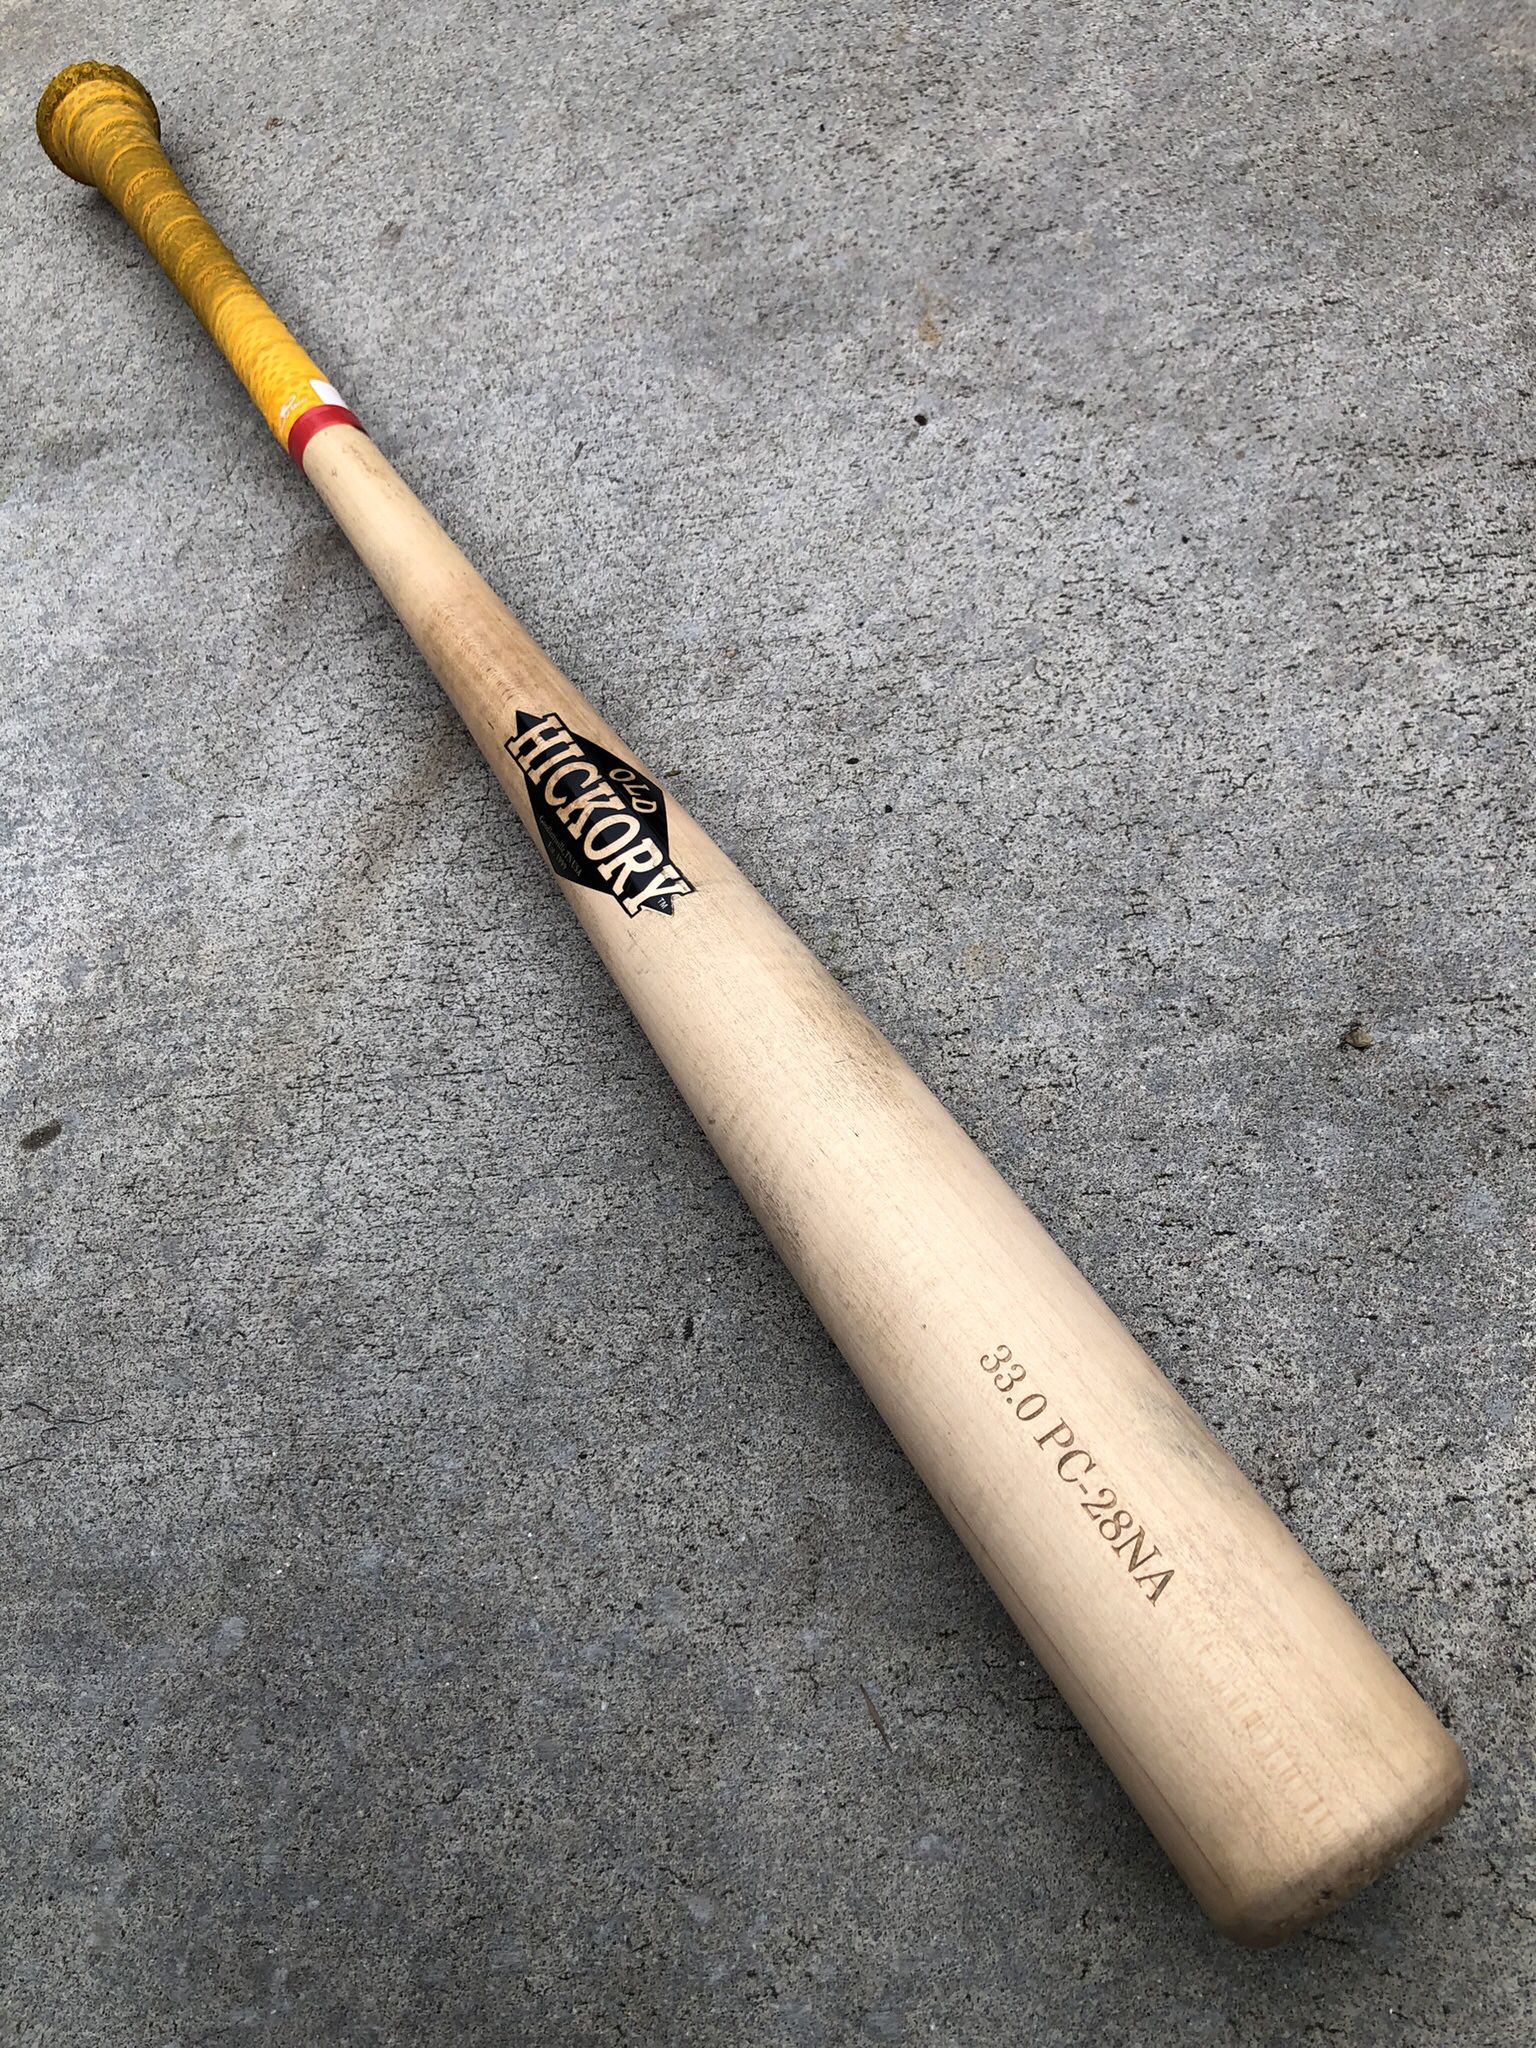 Hickory PC-28NA Baseball Wood Bat Sz  33” In Excellent Condition Have More Equipment $100 firm